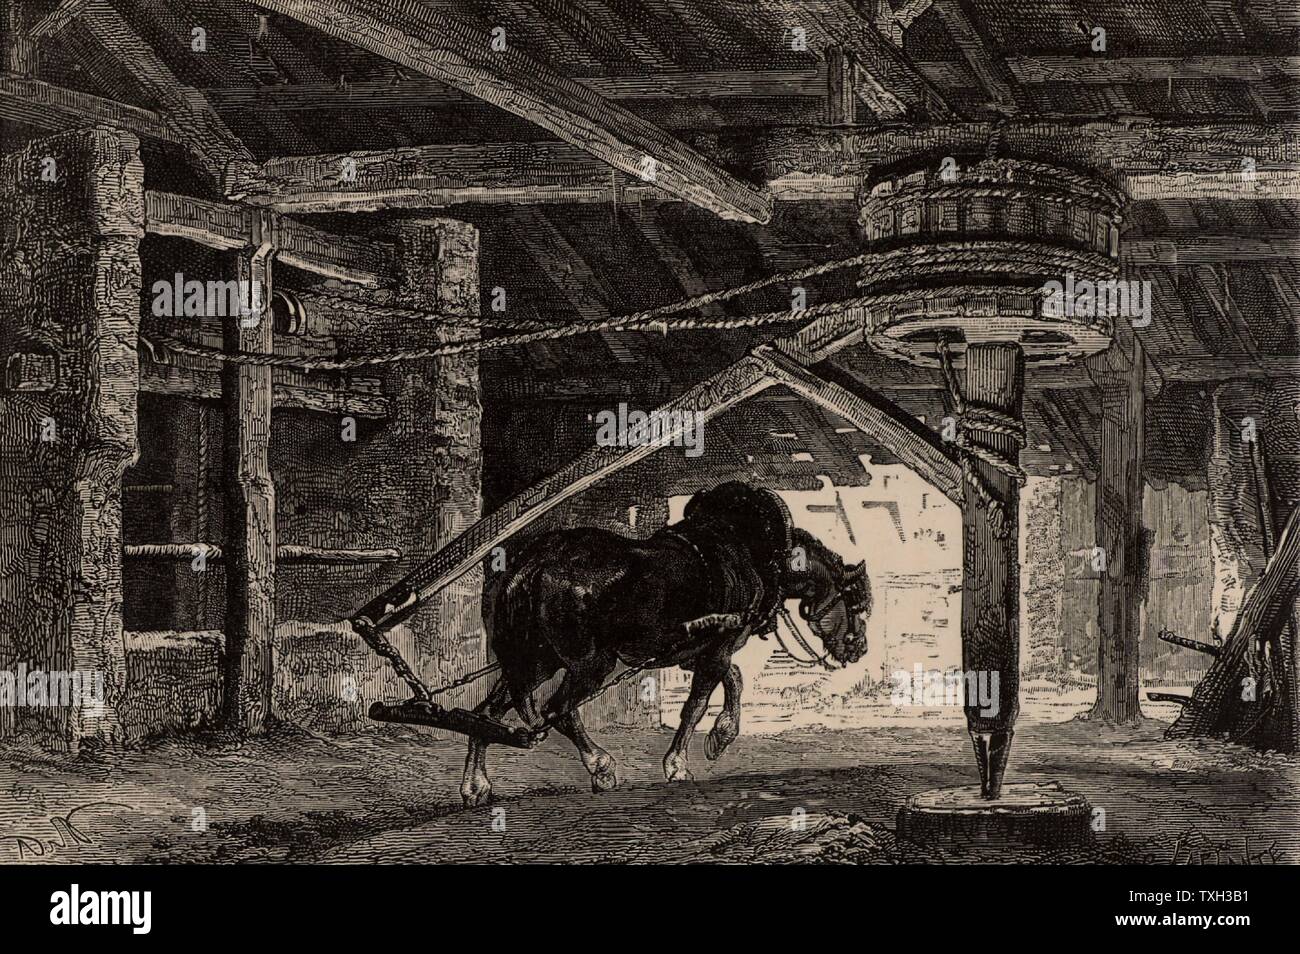 A horse-whim or horse-gin.  Such a device was used to raise coal from the bottom of a mine.   From  'Underground Life; or, Mines and Miners' by Louis Simonin (London, 1869). Wood engraving.  Mining. Stock Photo